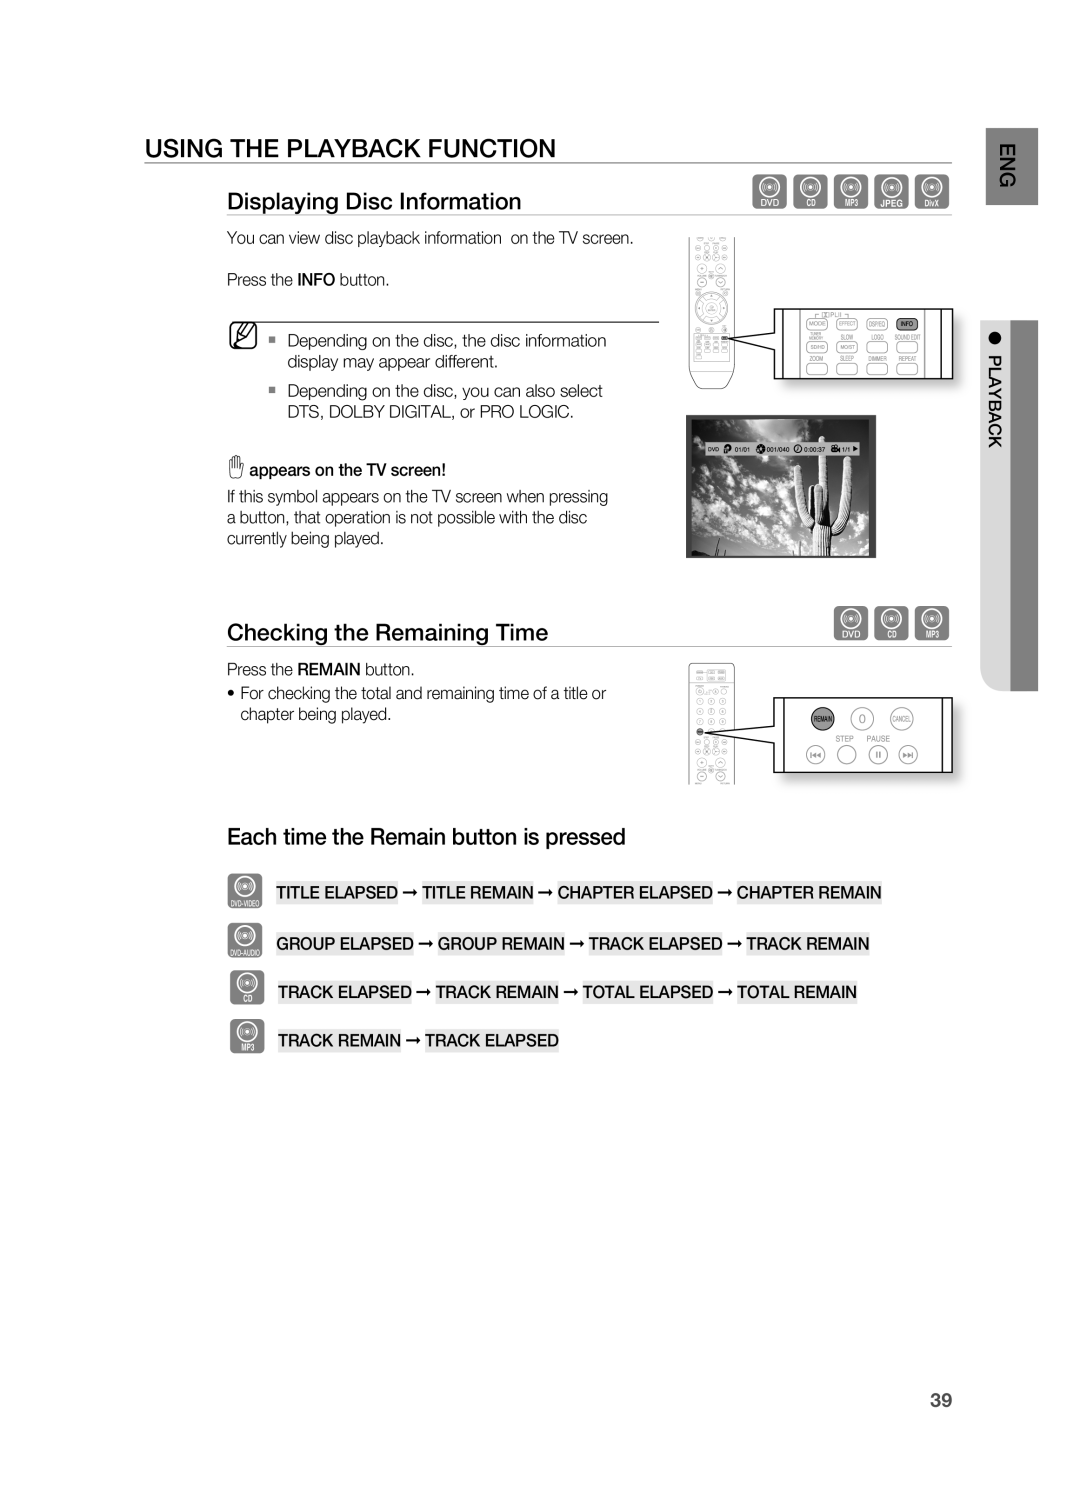 Samsung HT-TWZ315 manual dBAGD, USinG tHE PLAyBACK fUnCtiOn, Displaying Disc information, Checking the remaining time 